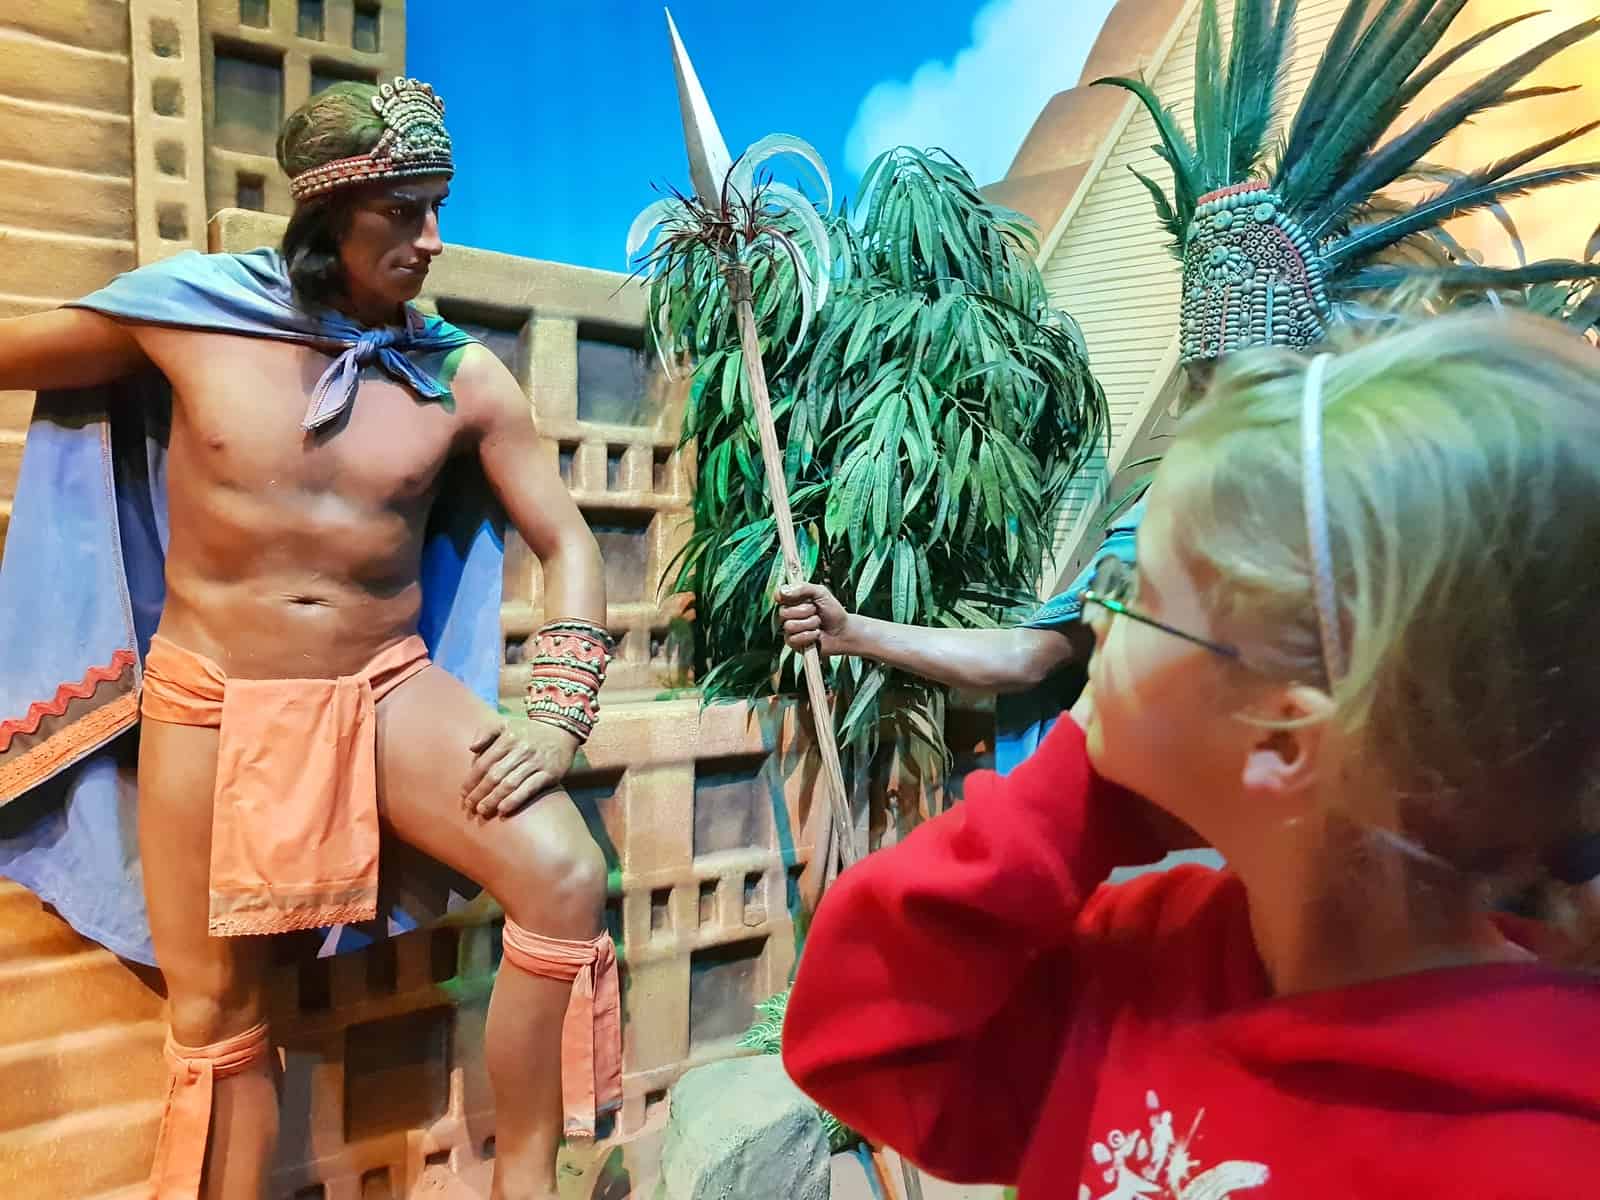 A family day out at Cadbury World Birmingham Aztec zone 